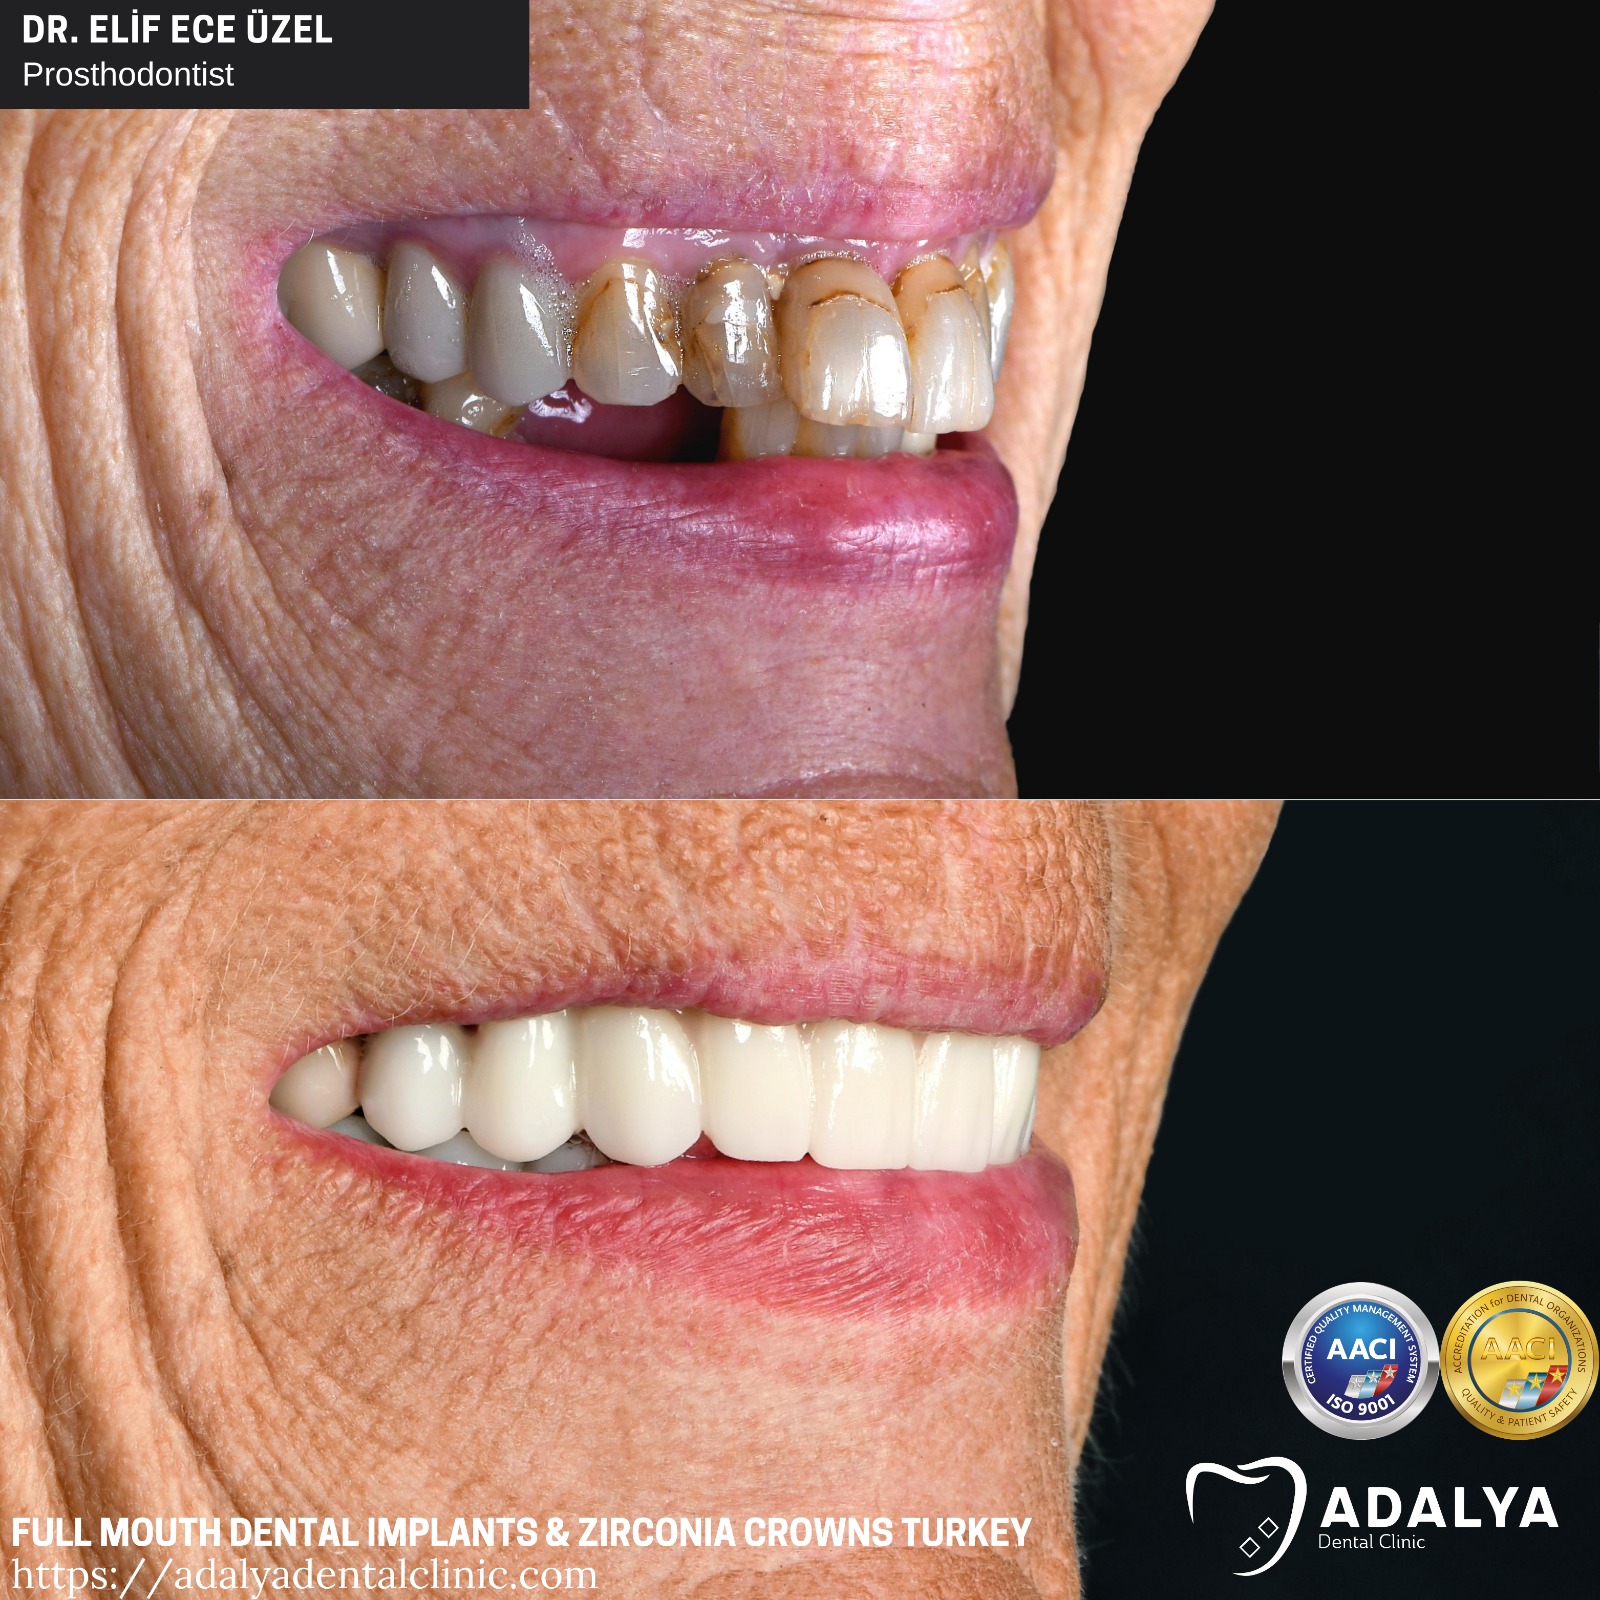 turkey dentist antalya full mouth dental implants package deals cost price tooth